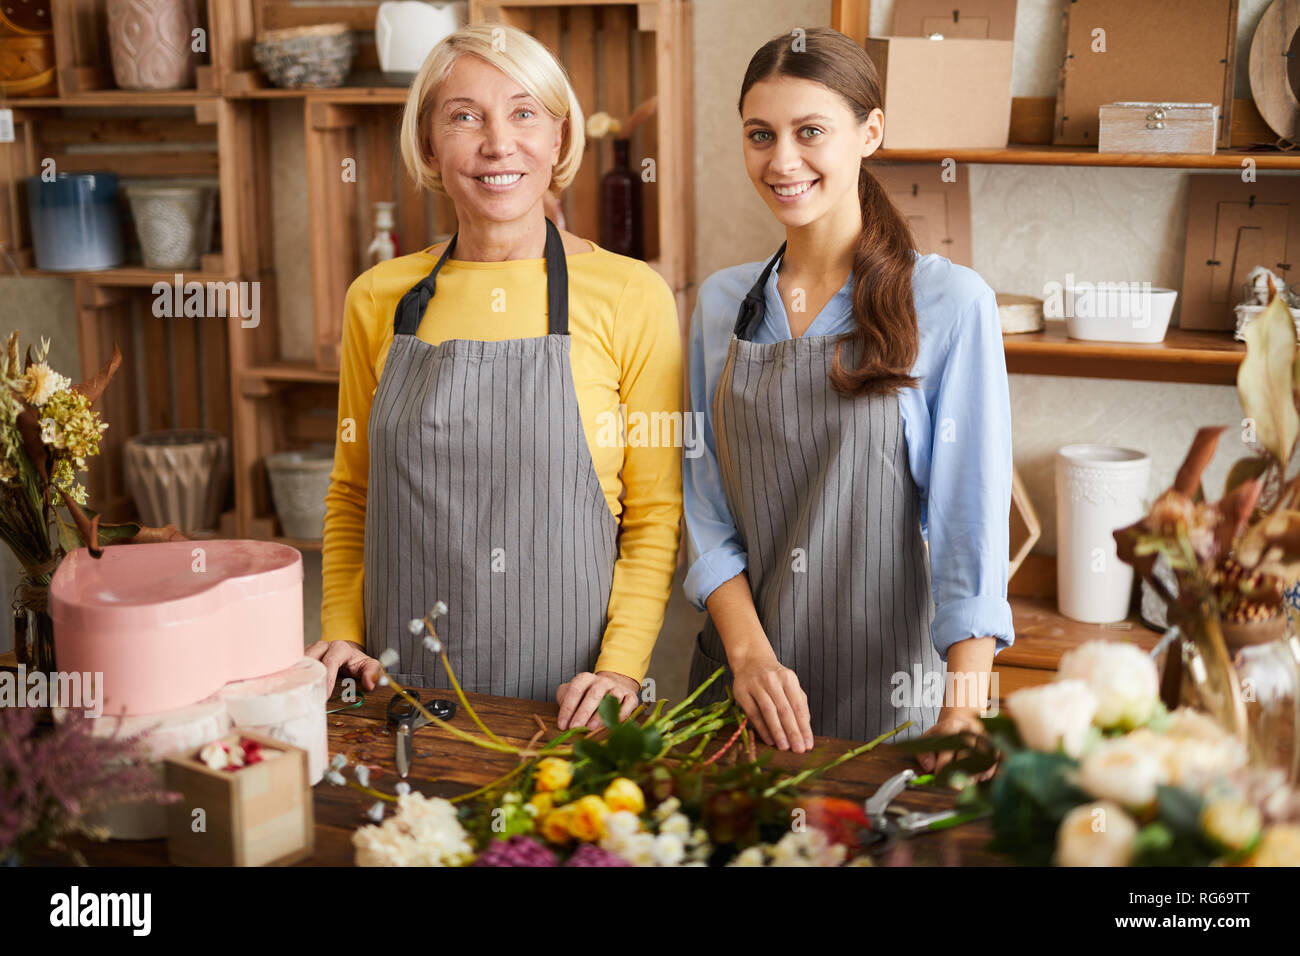 Two Florists in Shop Stock Photo